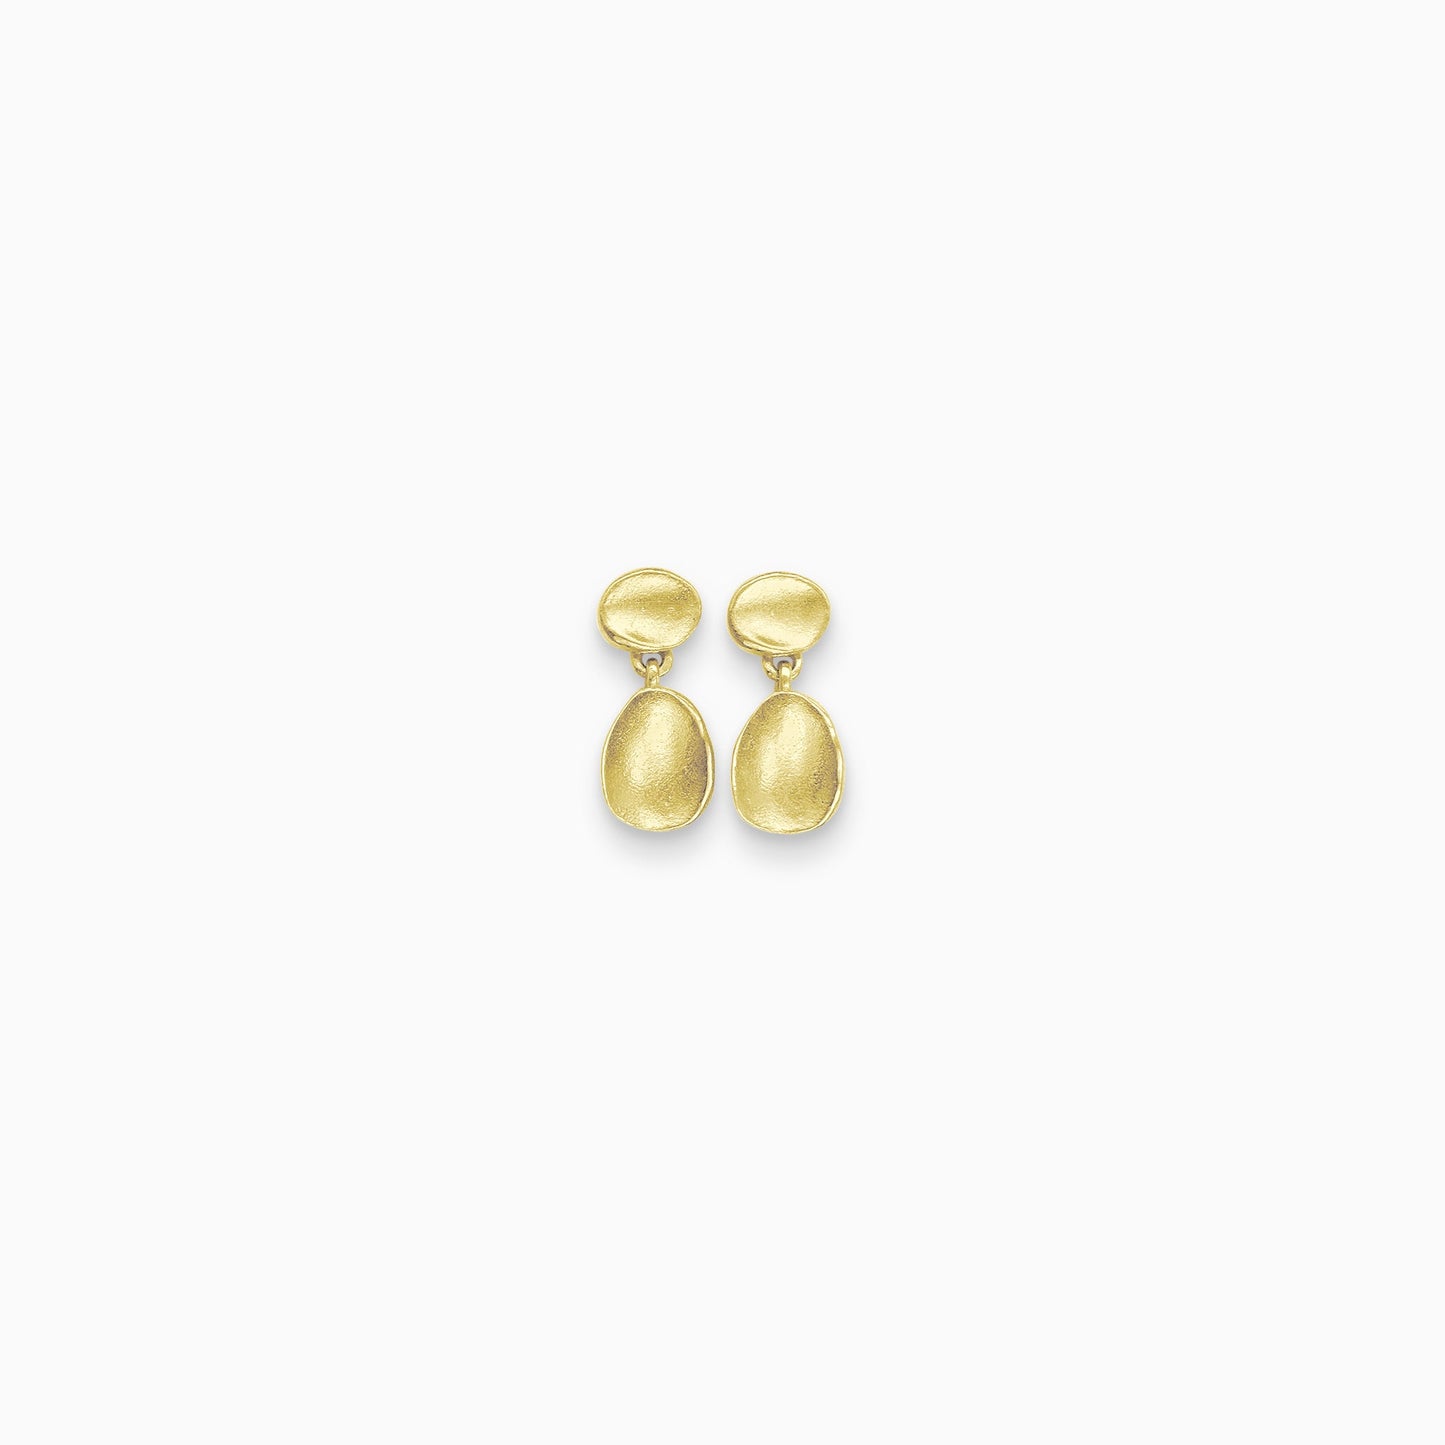 A pair of 18ct Fairtrade yellow gold small earrings, a dainty concave oval disc has an stud ear fastening and hanging below is another slightly larger oval disc. Satin finish. 15mm length, 6mm width